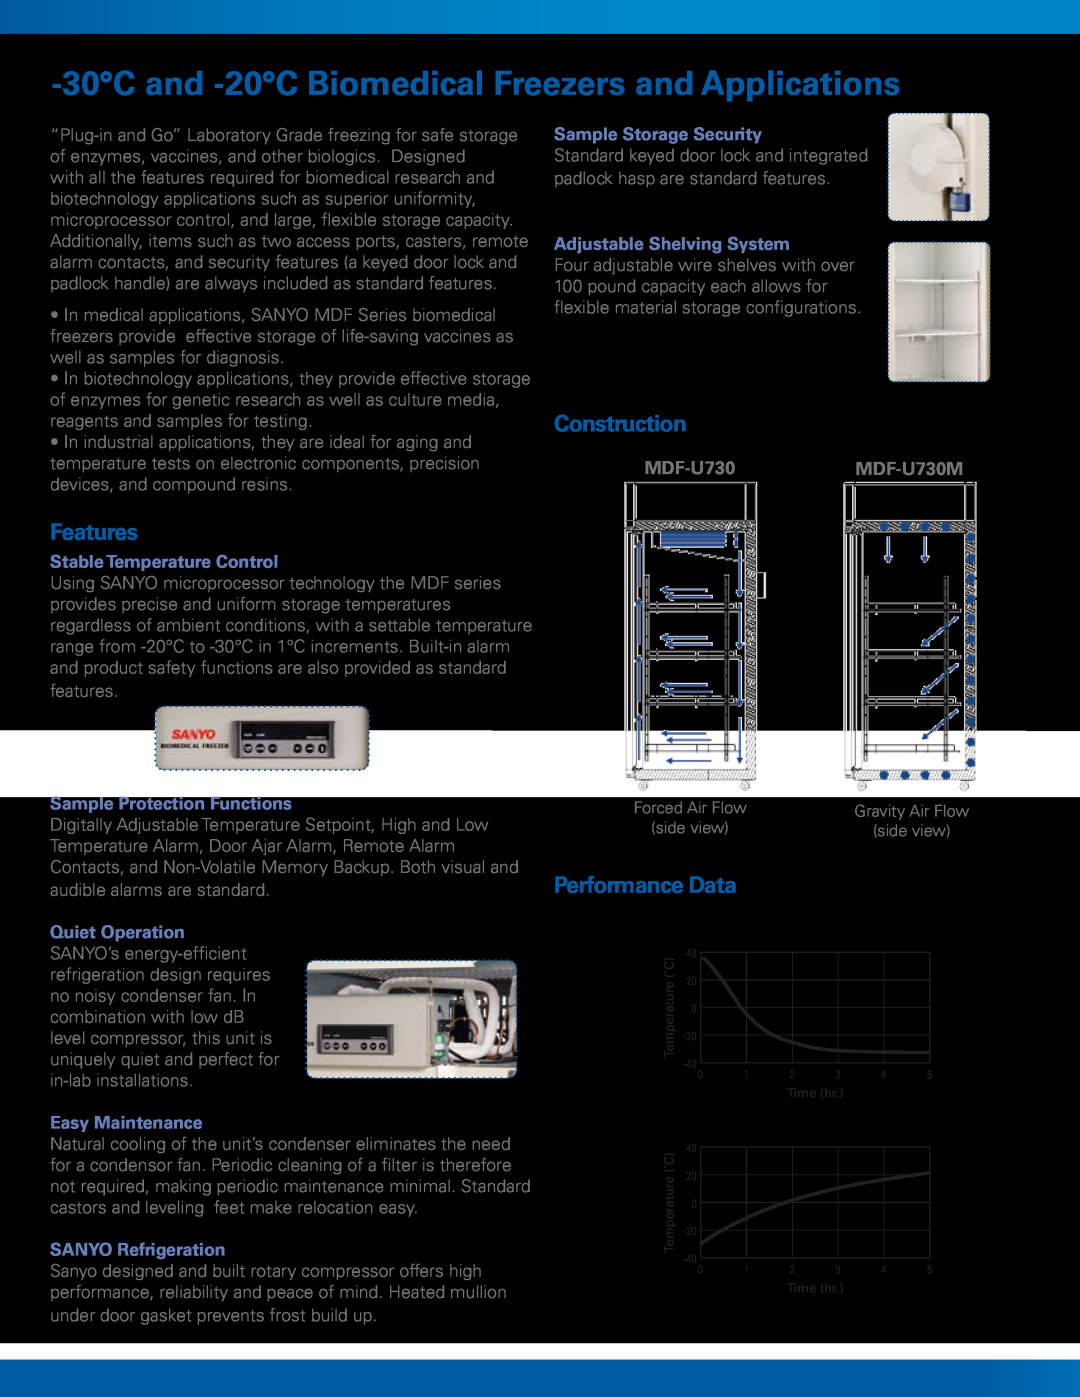 Sanyo MDF-U730 30Cand -20CBiomedical Freezers and Applications, Features, Construction, Performance Data, Easy Maintenance 